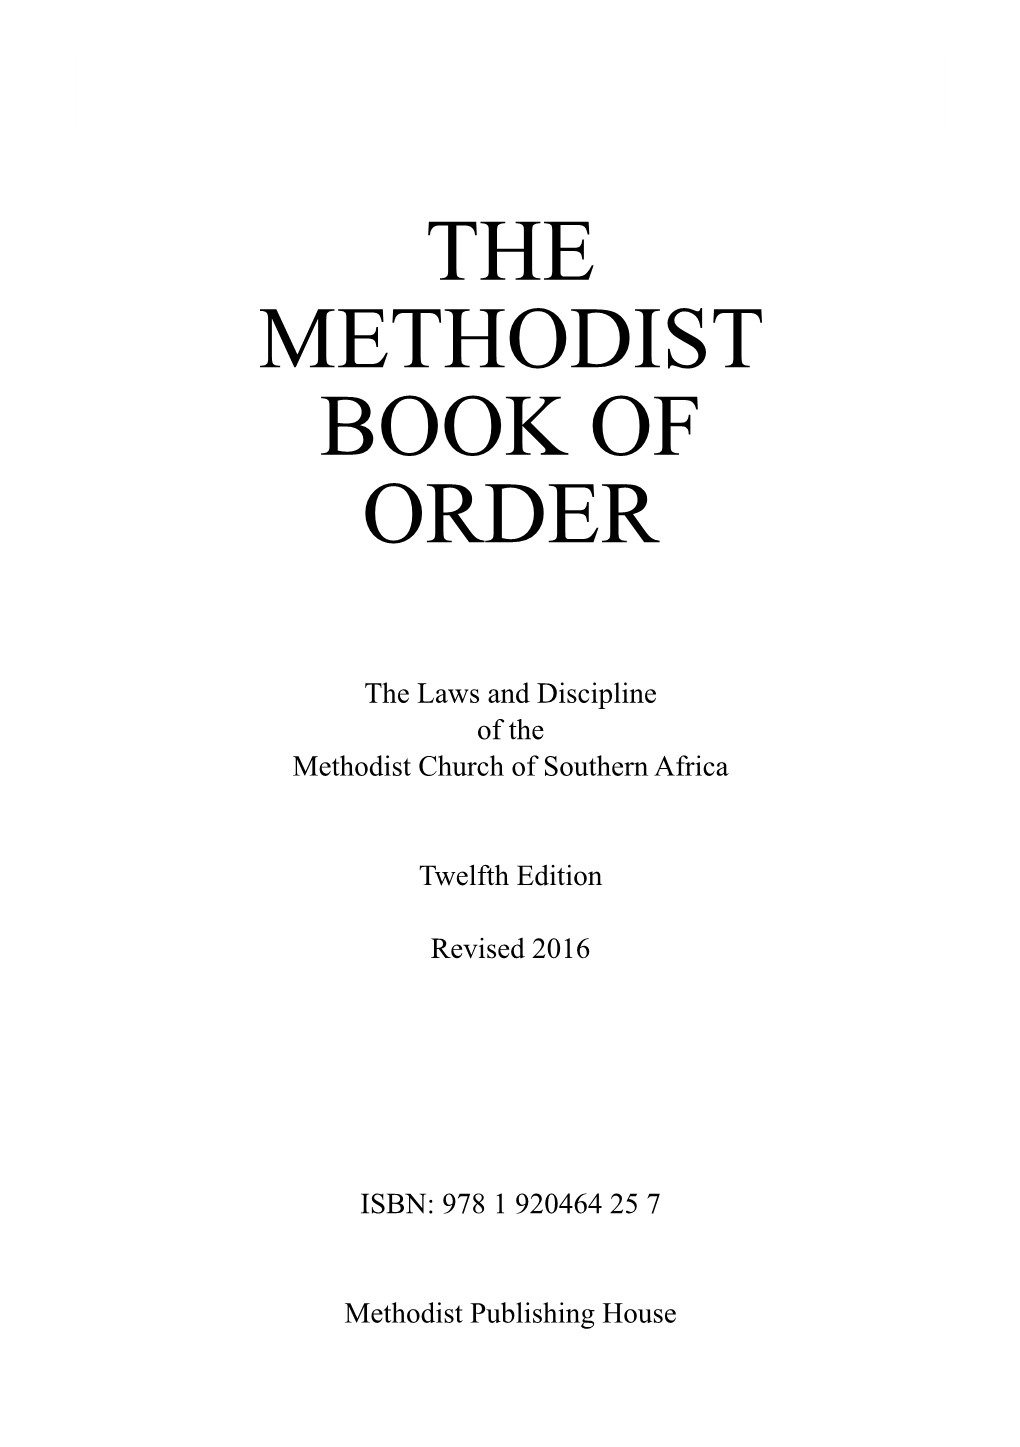 The Methodist Book of Order